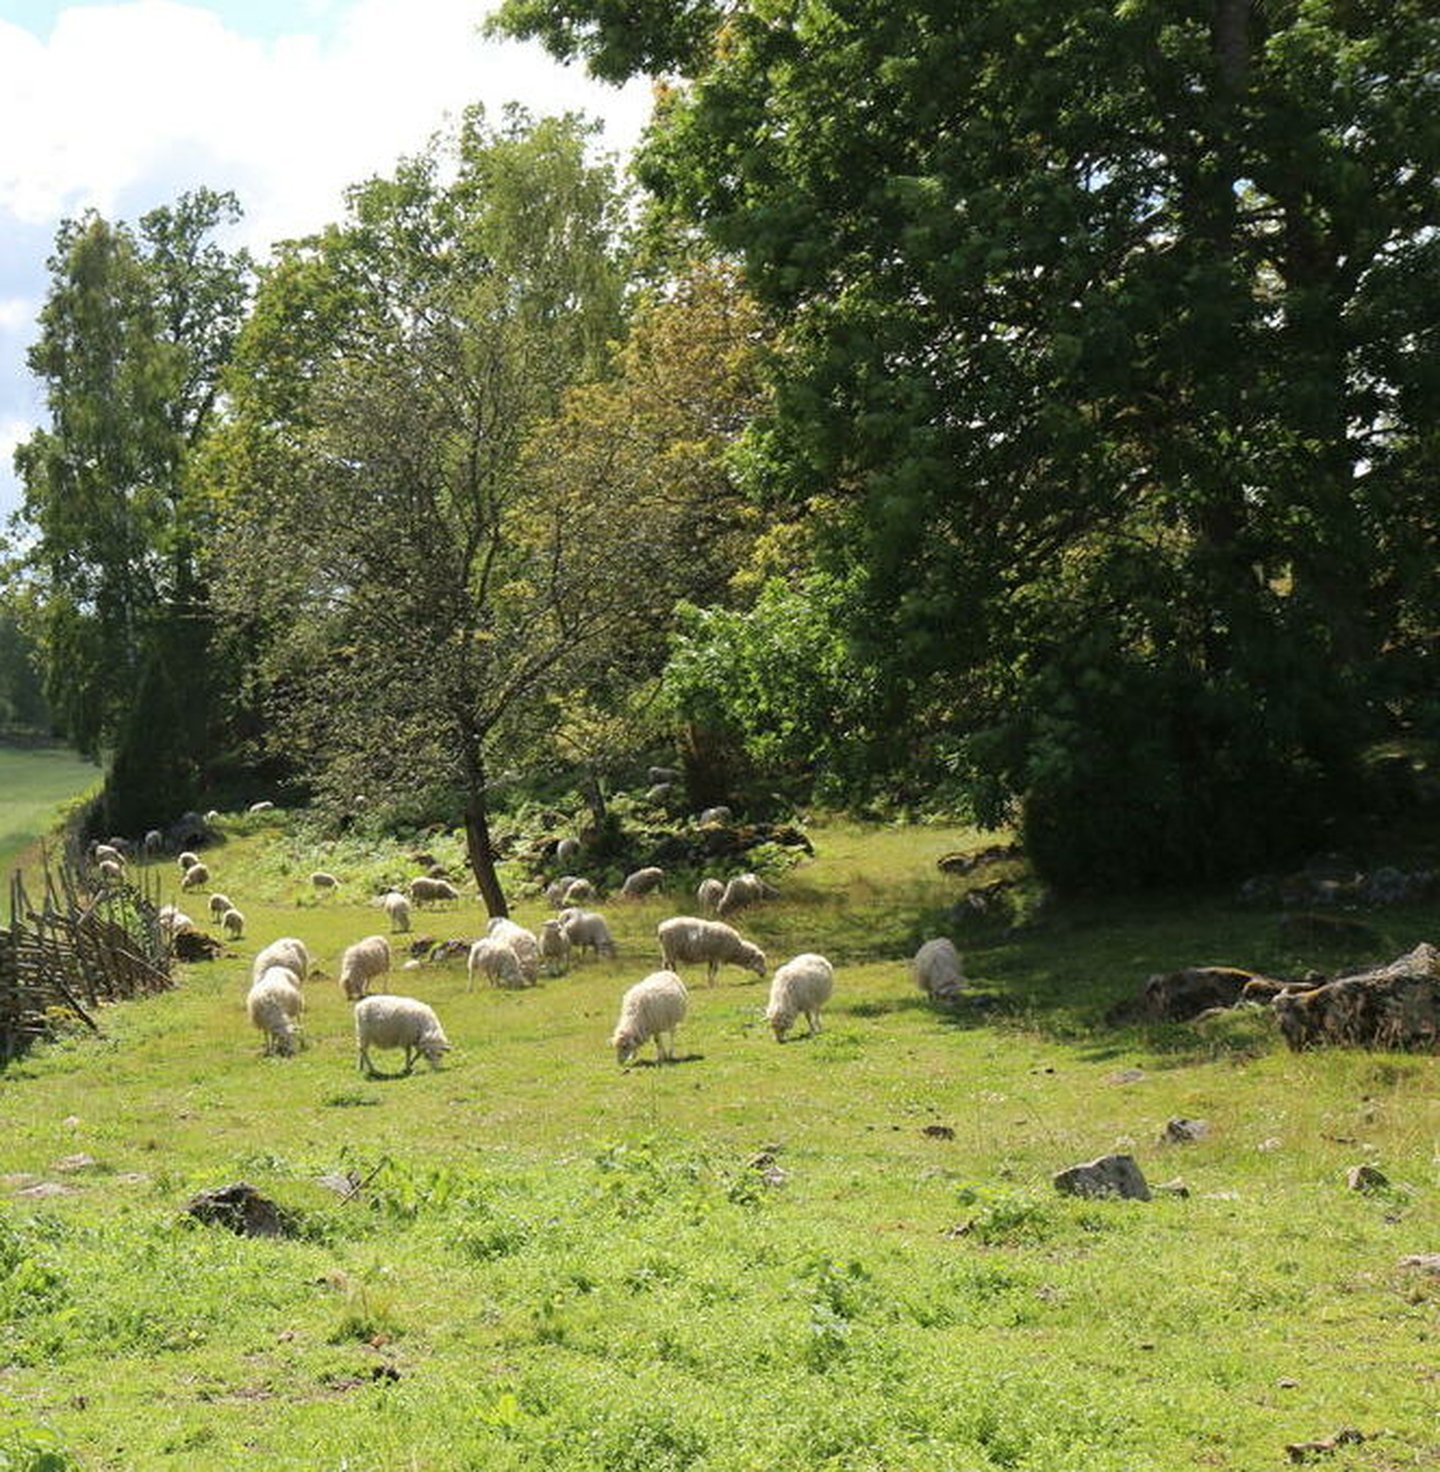 Sheeps (Ovis aries) grazing in a field in Sweden, with old traditional fences called 